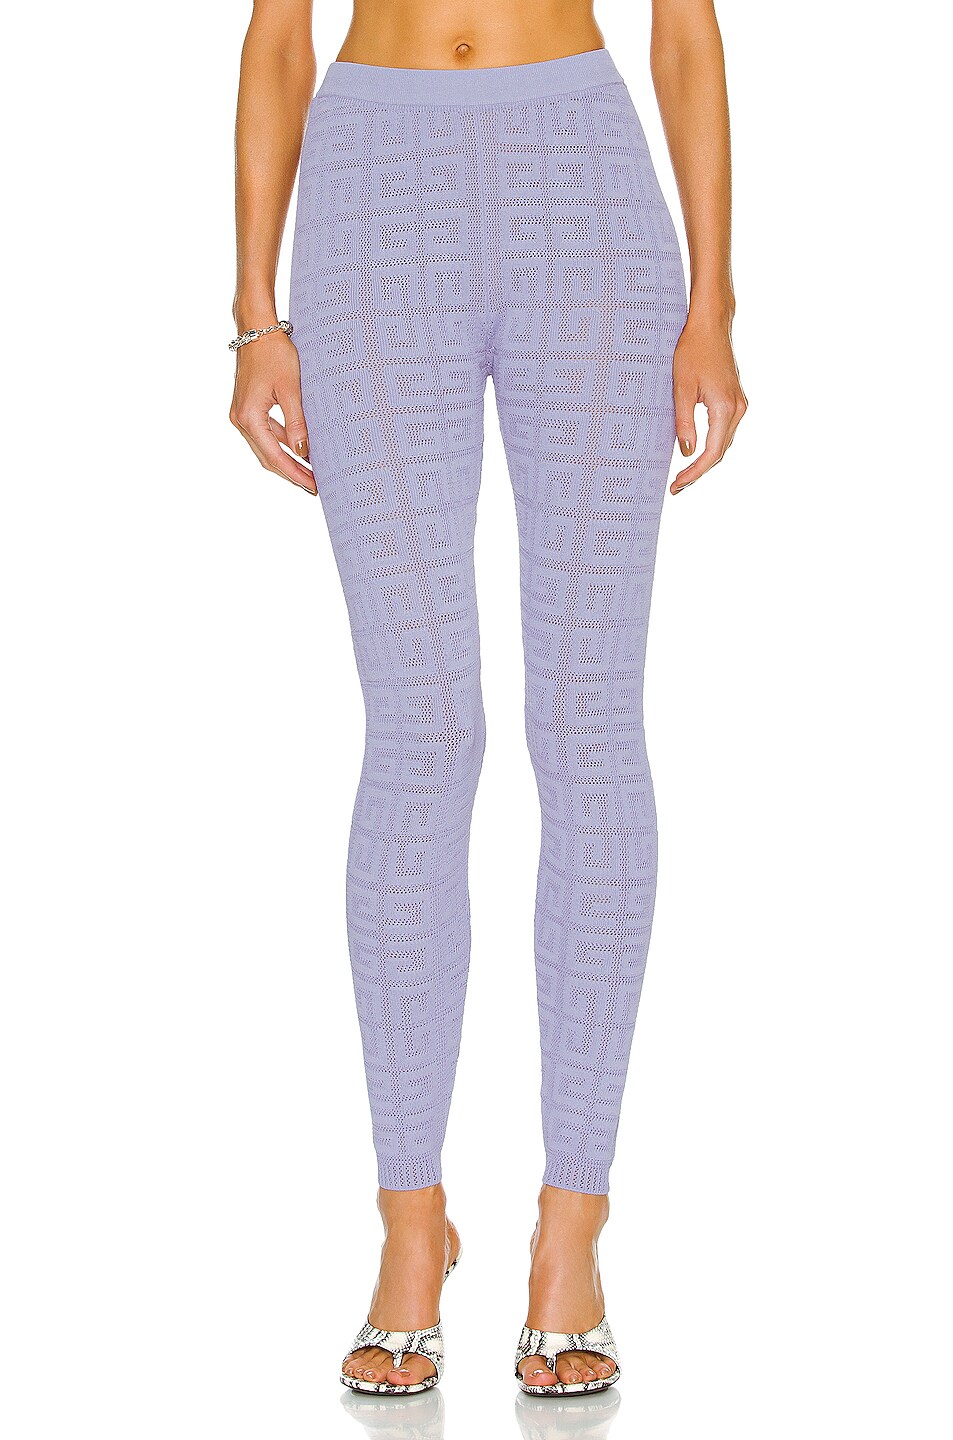 Givenchy All Over 4G Legging in Lilac | FWRD